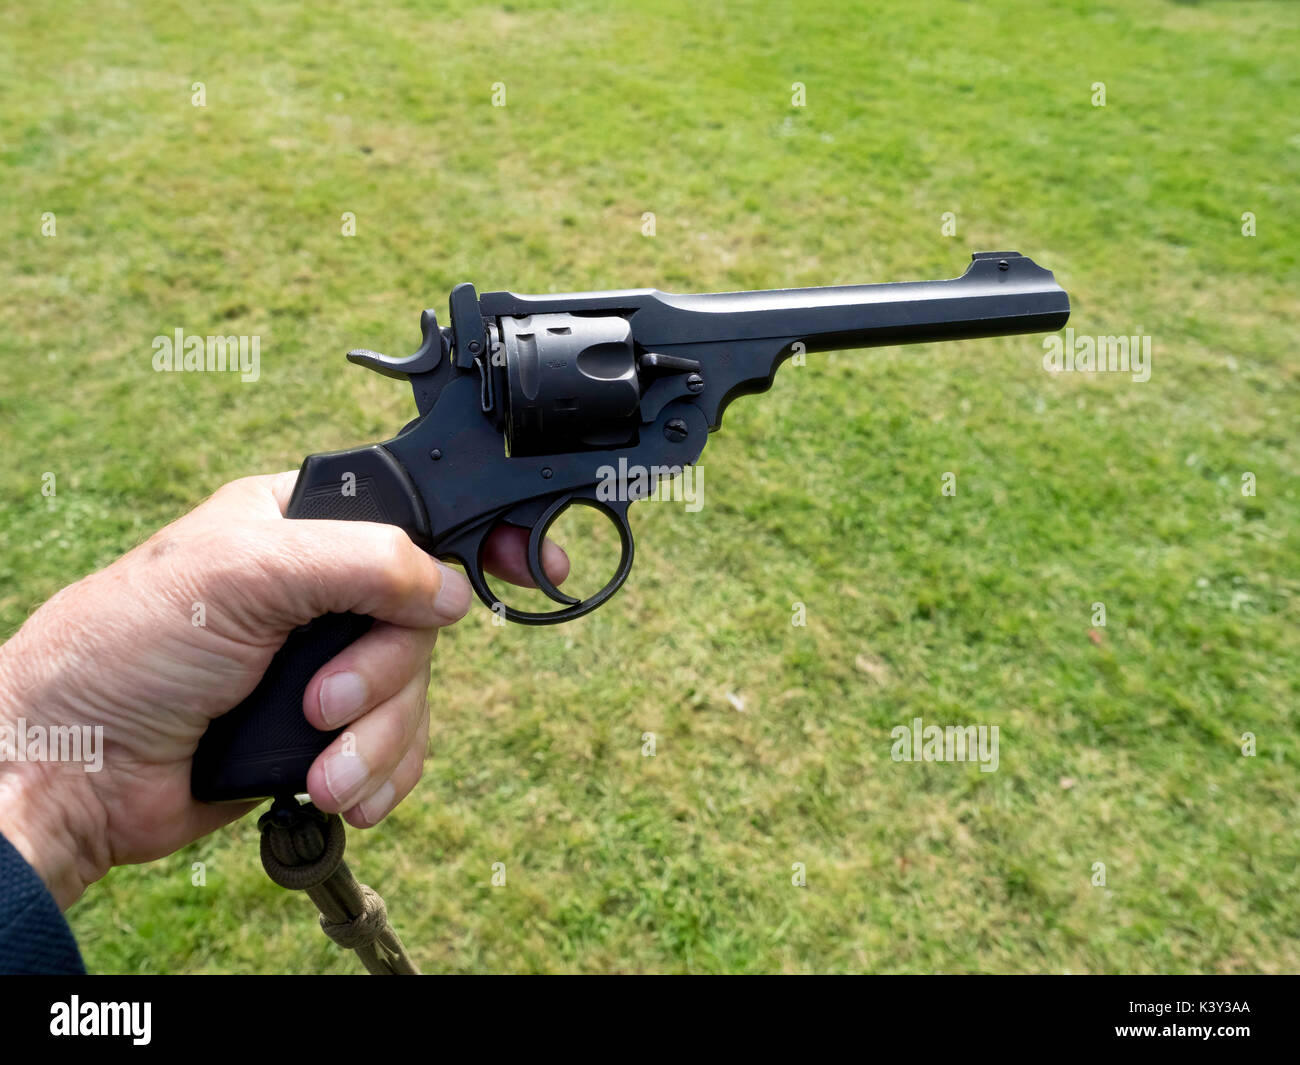 Enfield top break revolver handgun widely used by the British Military through the second world war this model is dated 1924 Stock Photo